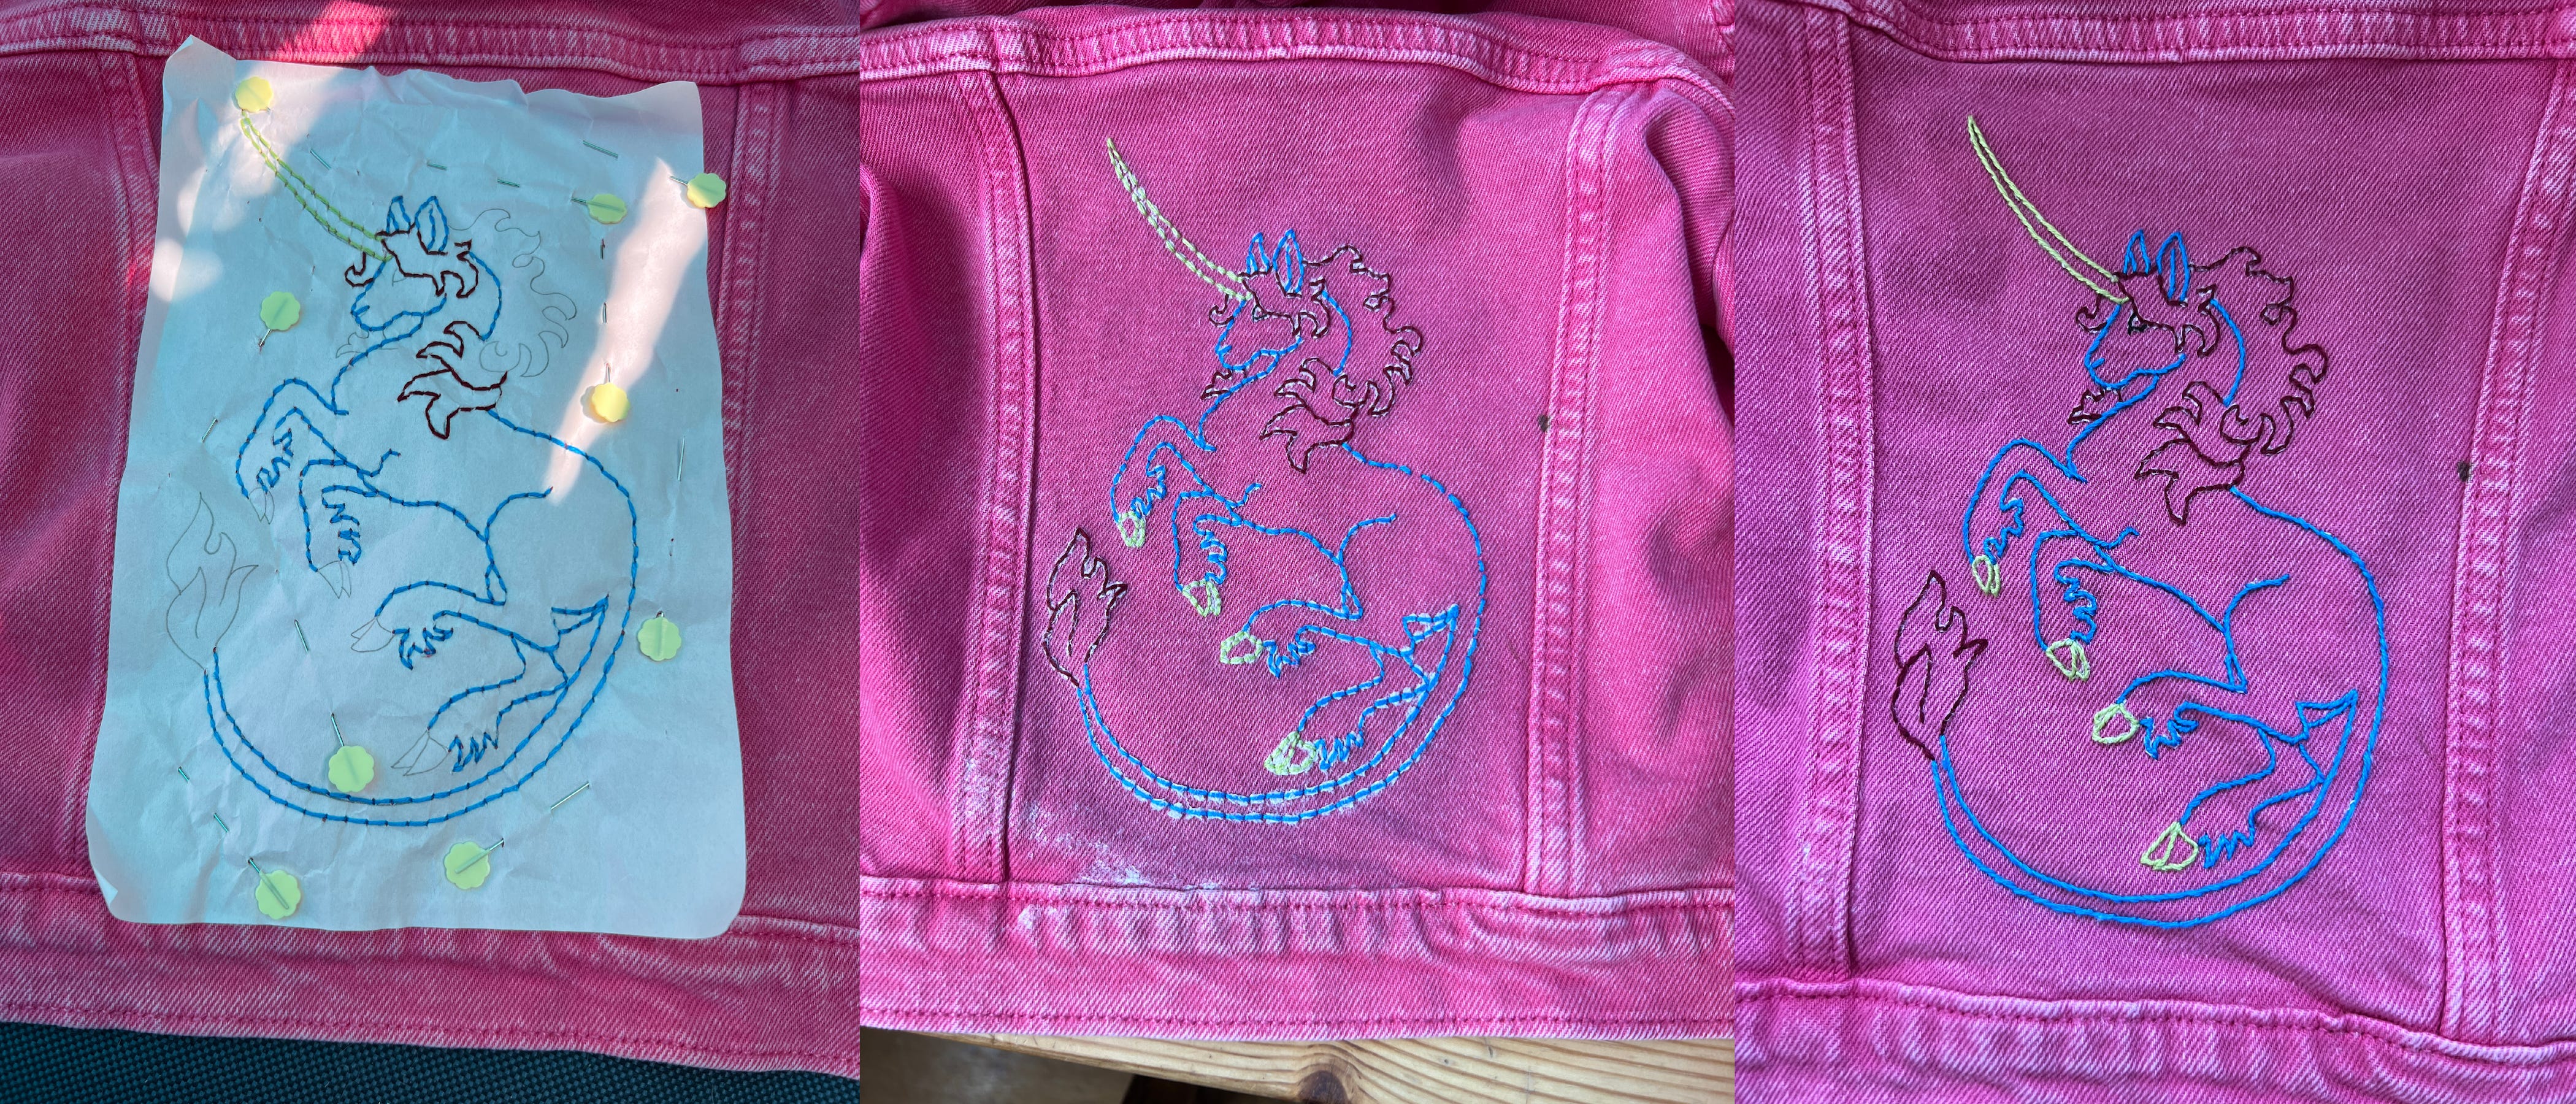 Three progress photos of a uunicorn embroidered on a pink denim jacket. The first image on the left is of the template for the image drawn on white paper pinned to the jacket. The unicorn is partially embroidered, the body outlined in bright blue floss, the mane partially complete in a raspberry floss, and the horn done in a vibrant green floss. The middle photograph shows the piece after the dissolvable paper template has been washed away and the backstitching is all complete. The hooves are now also green and the mane and tail are the same raspberry colour. The final image on the right is the completed piece once the body, hooves and horn were whipstitched. 